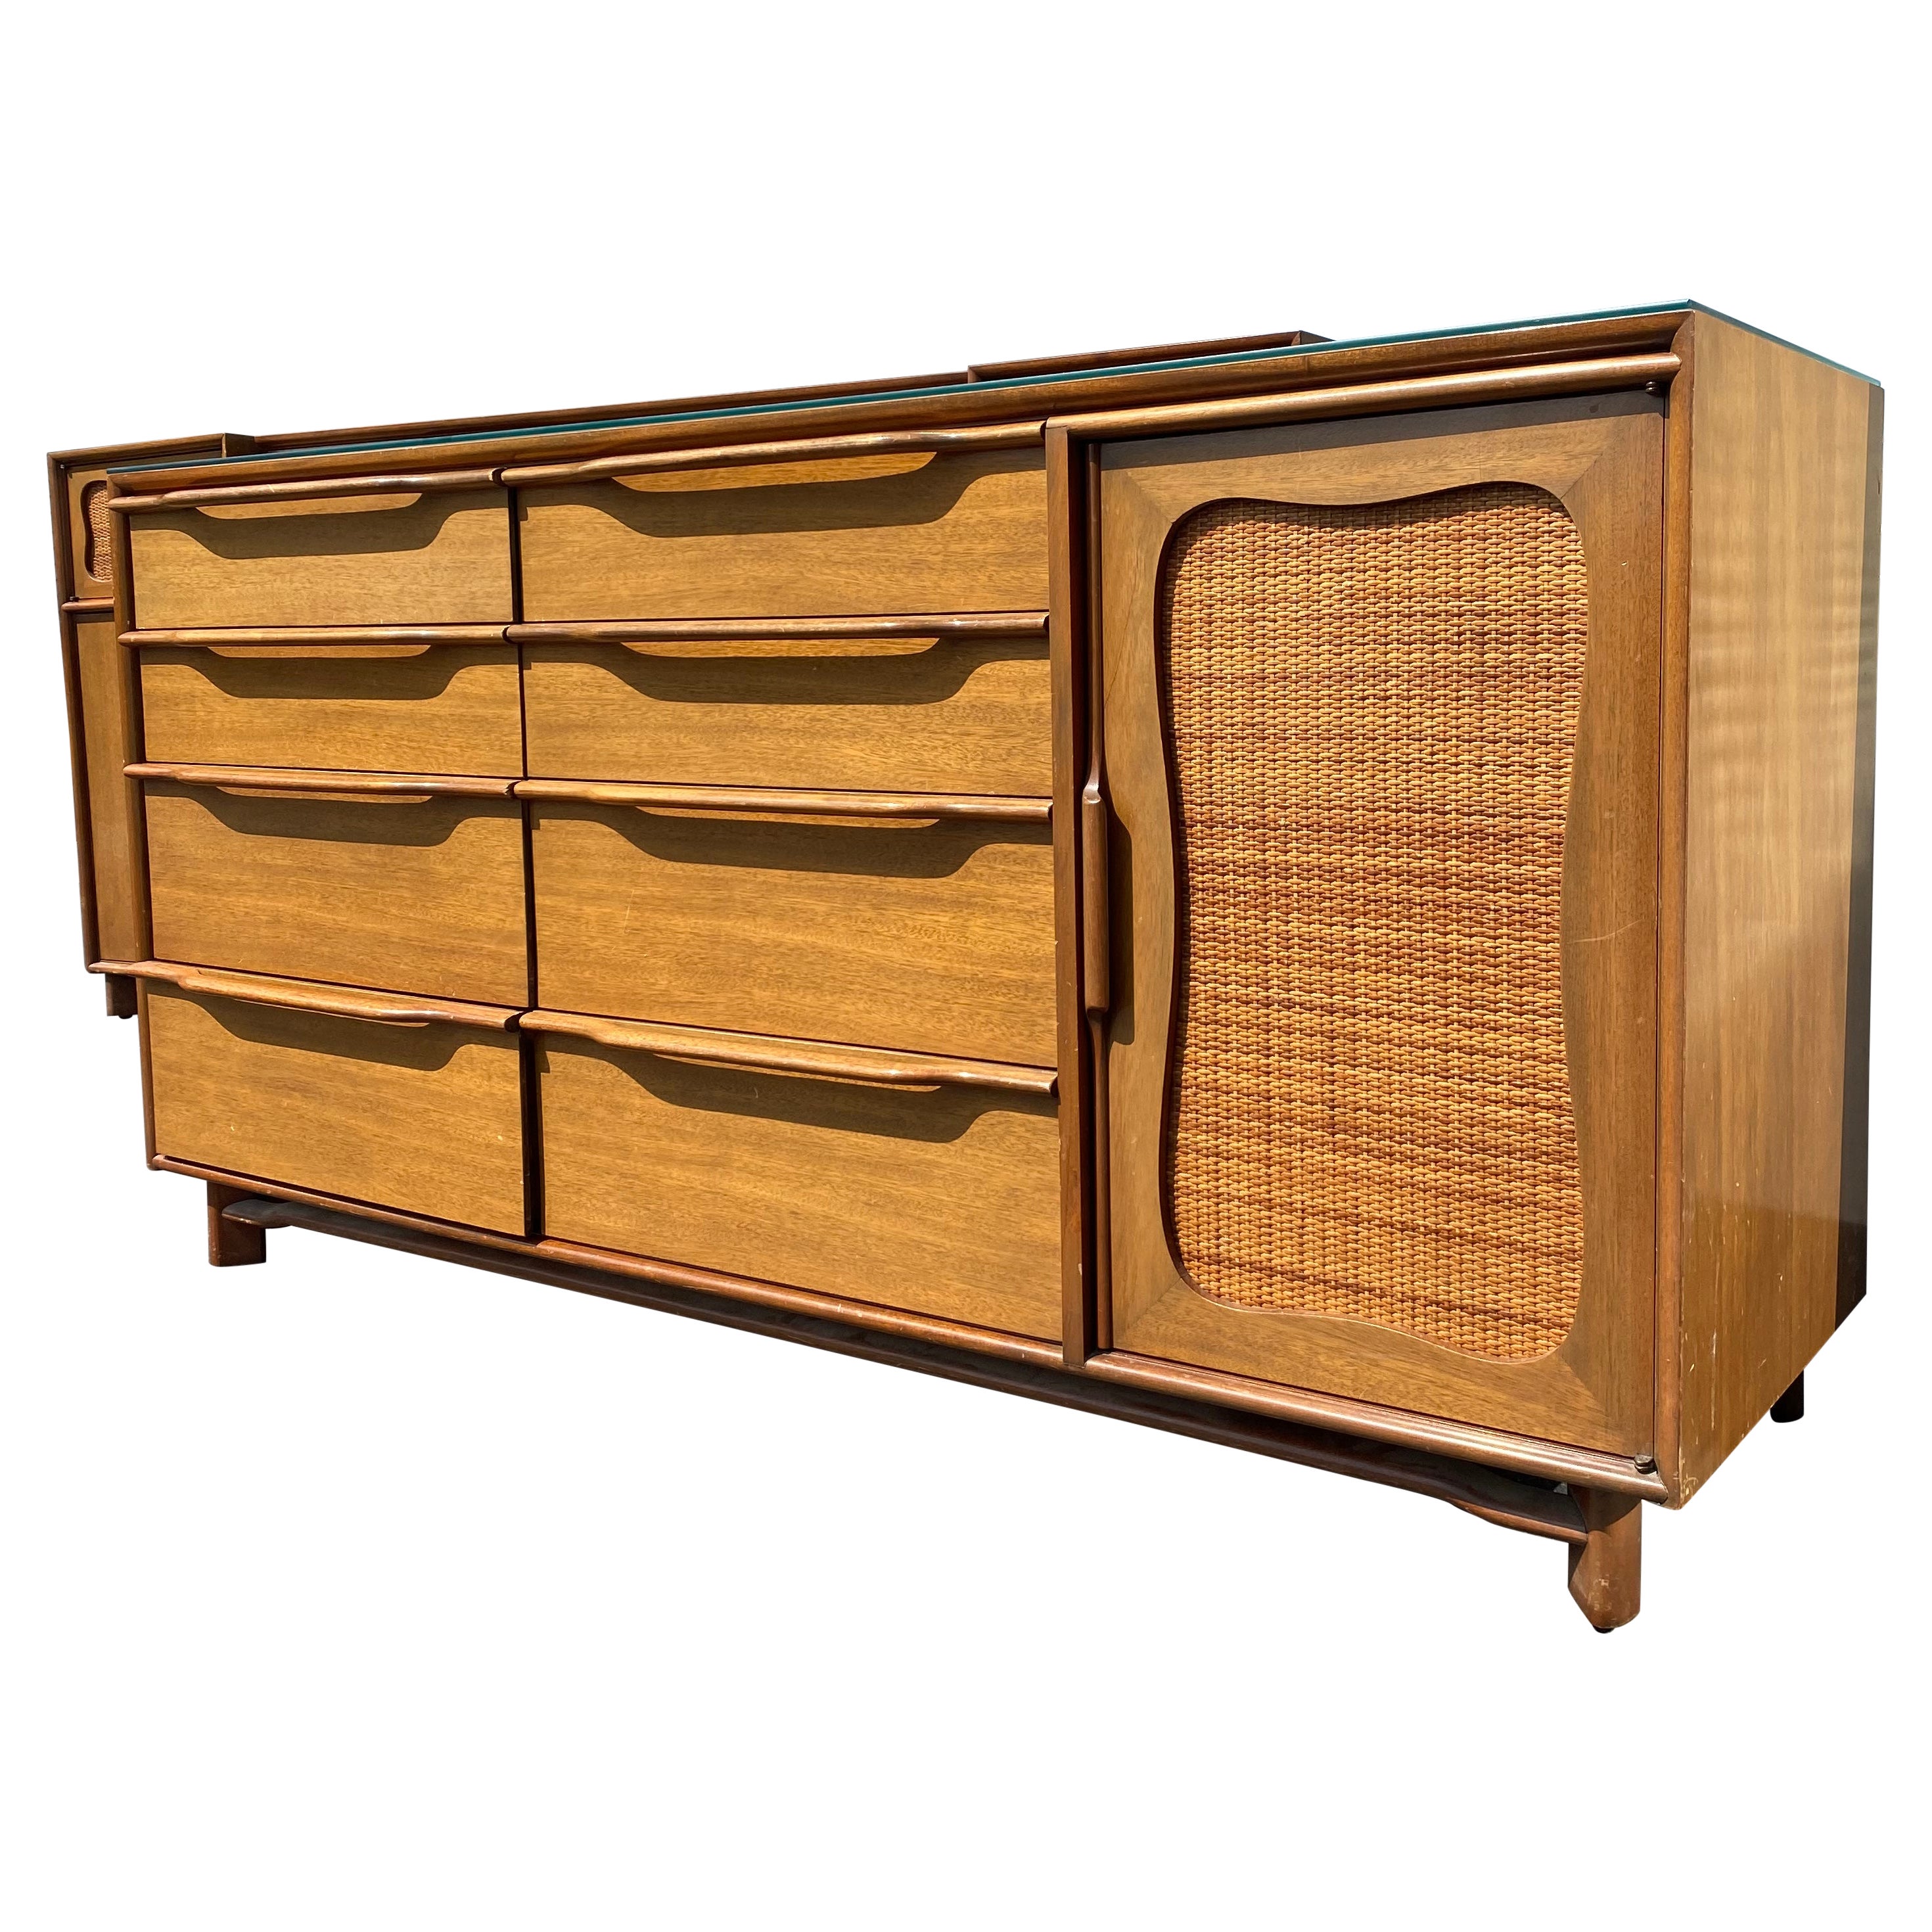 Mid-Century Dresser Buffet Sideboard Credenza by Hickory Manufacturing Co.